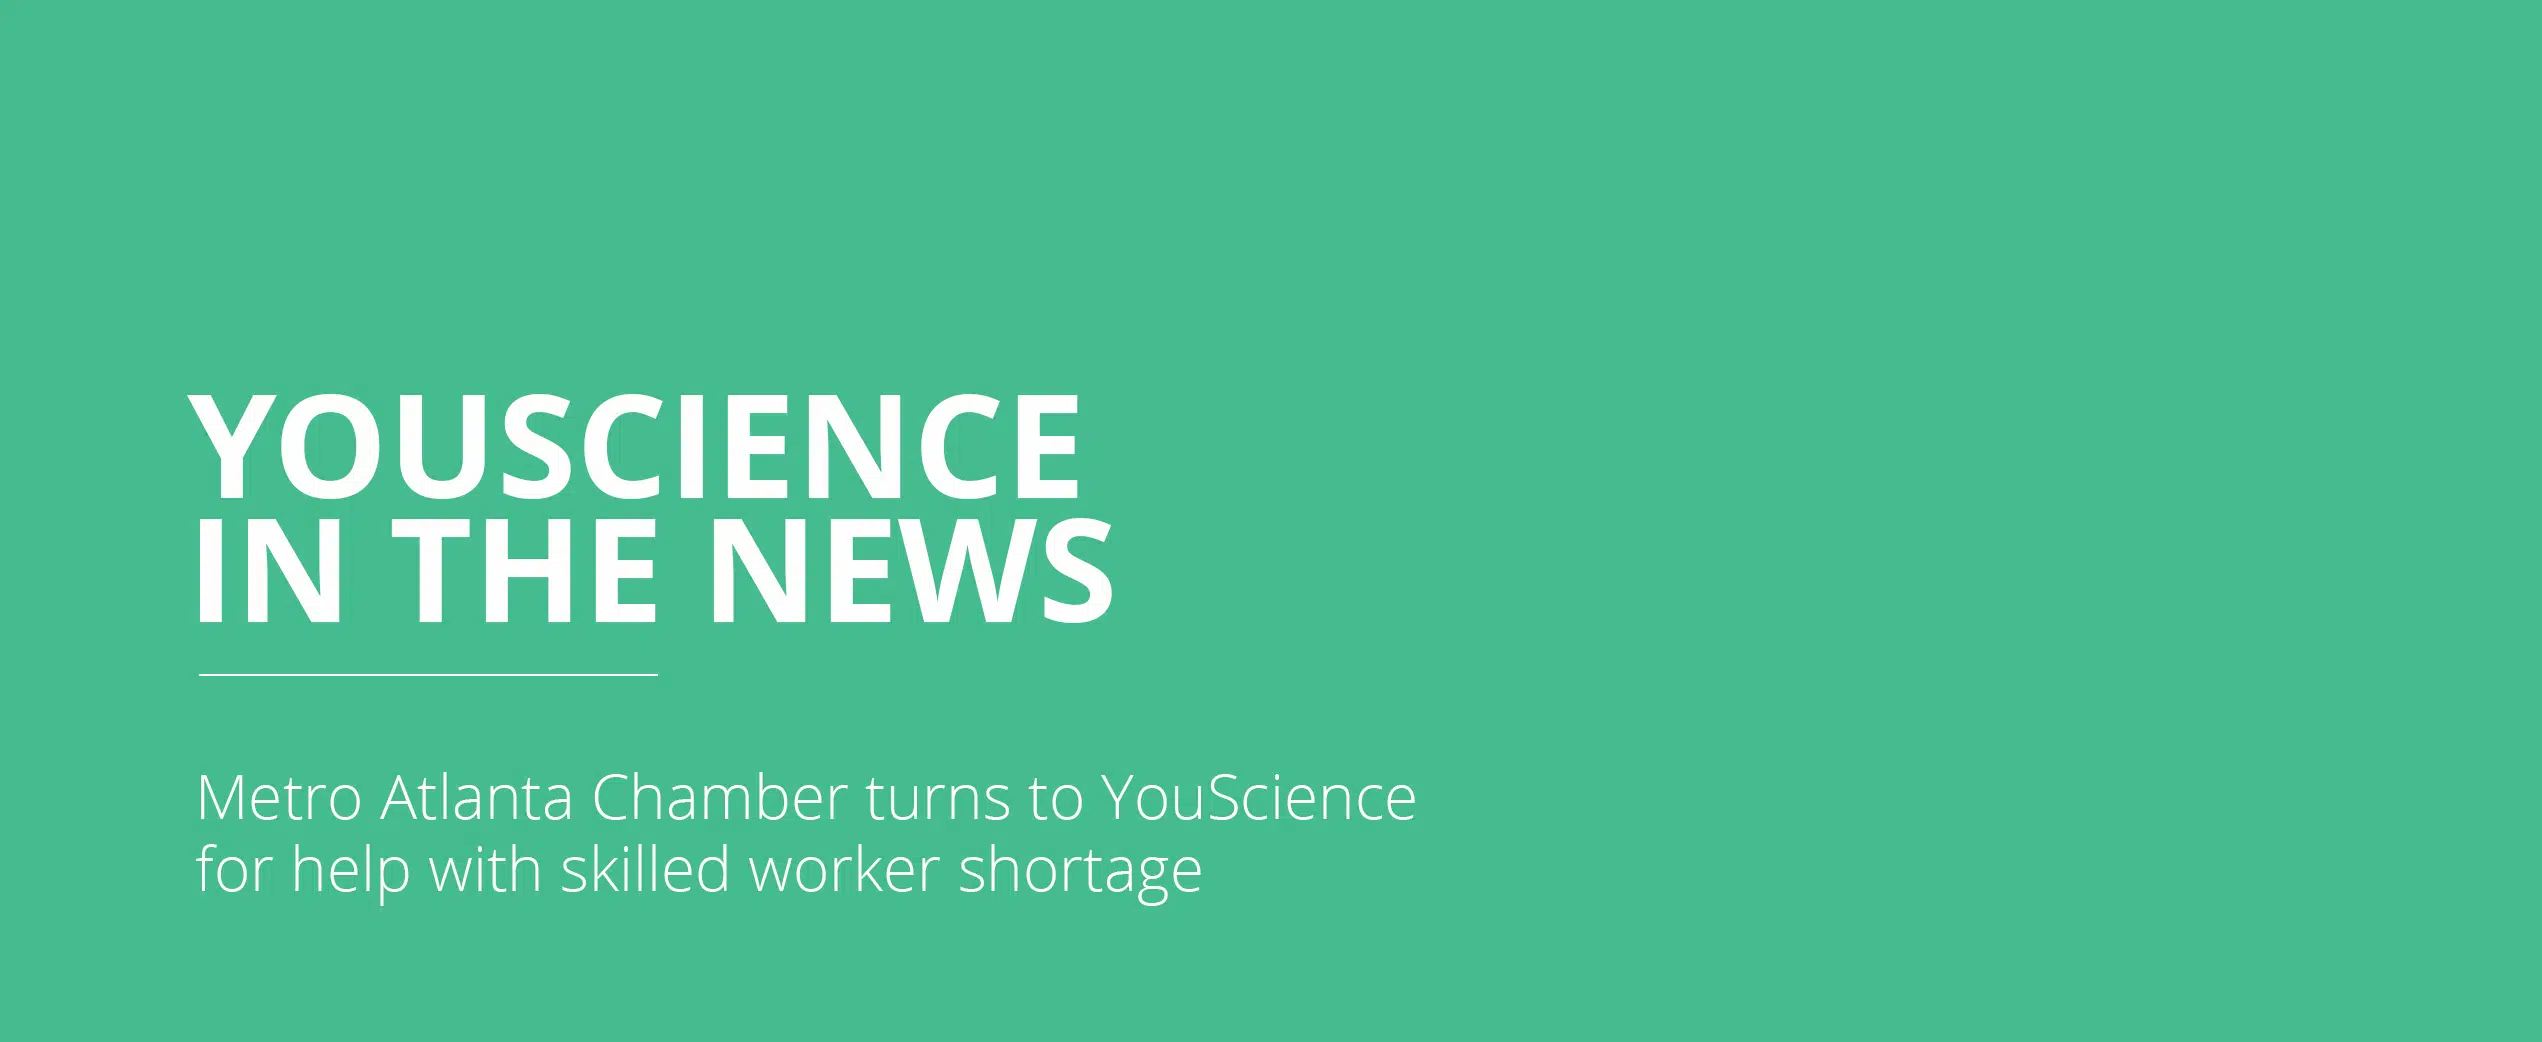 Metro Atlanta Chamber turns to YouScience for help with skilled worker shortage